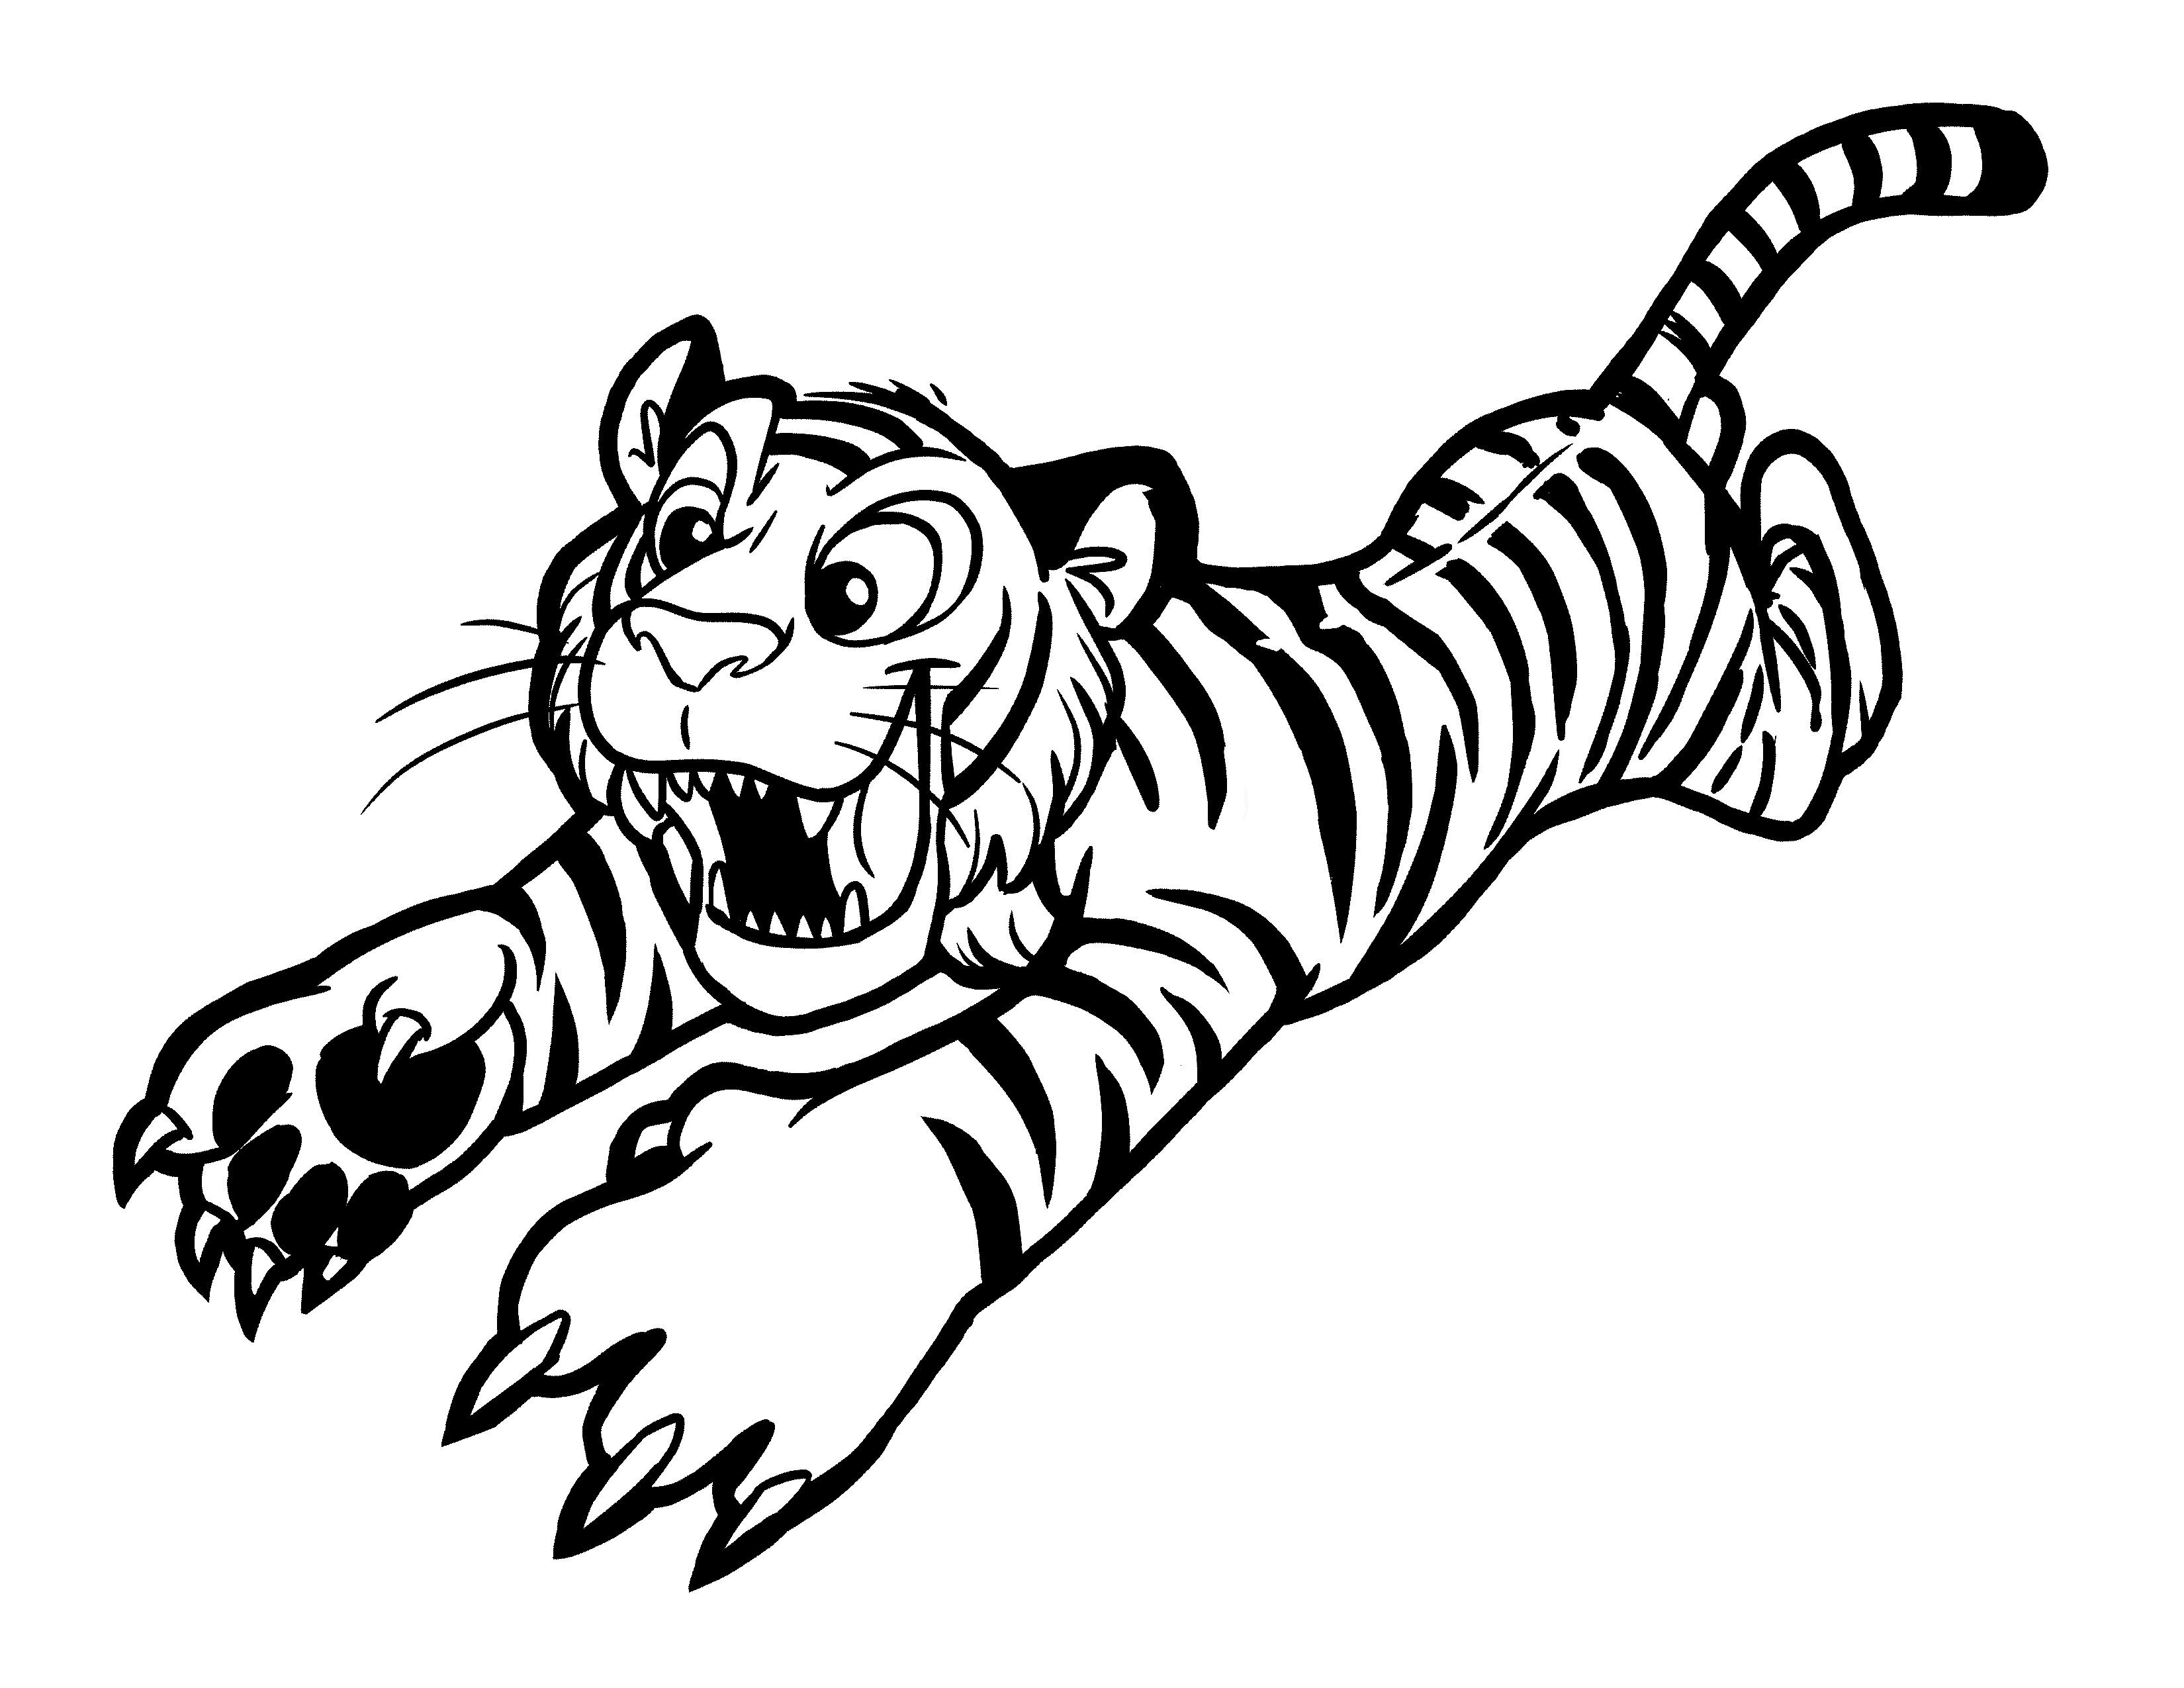 Tiiger coloring #15, Download drawings